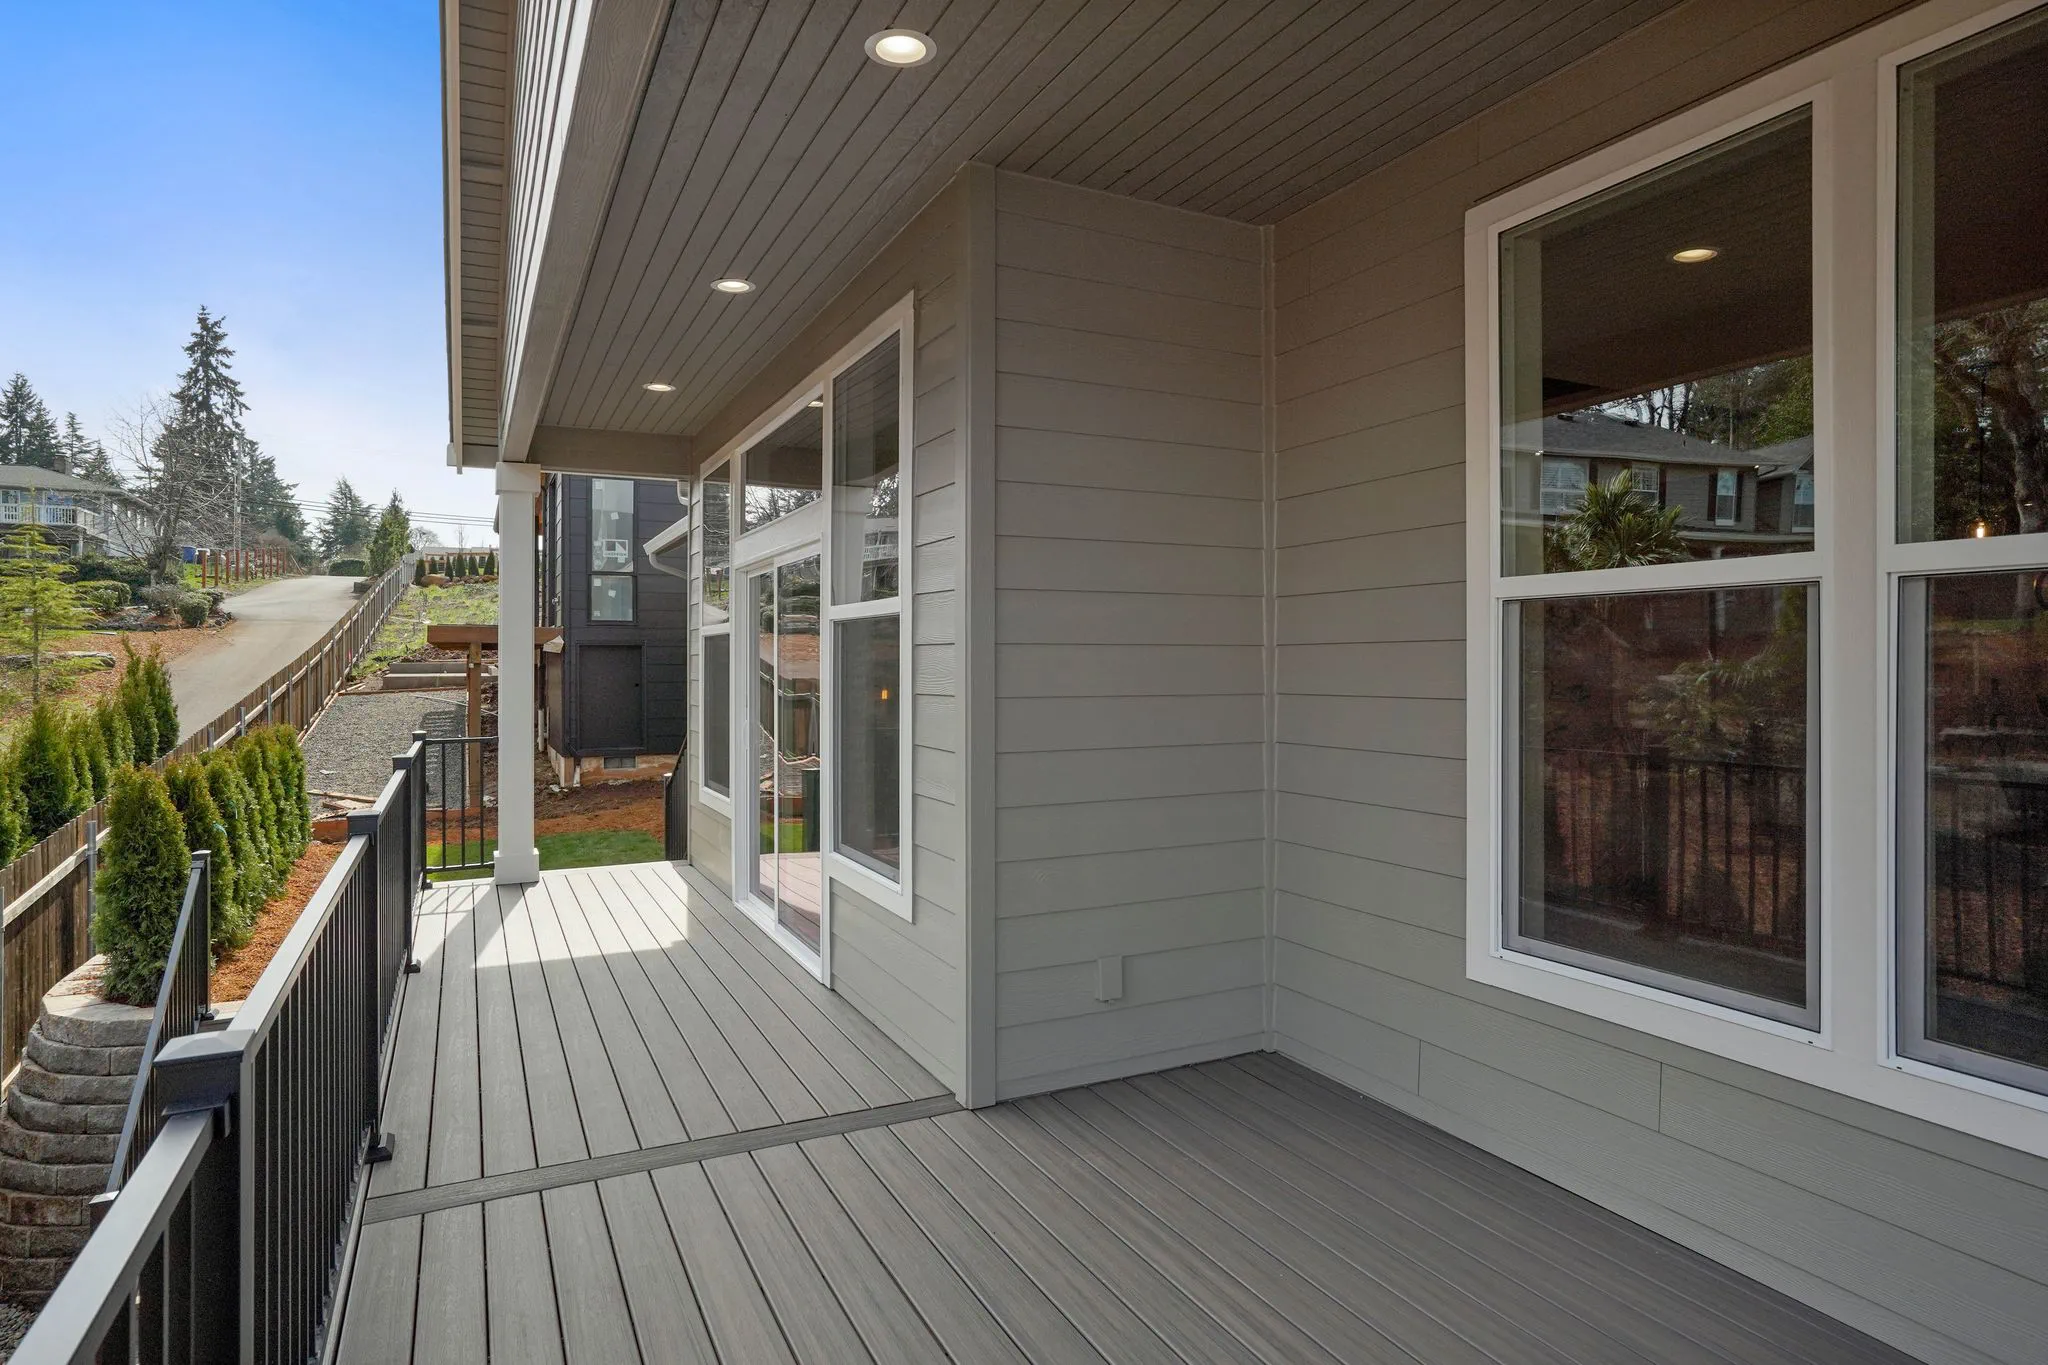 Exterior Deck With View To Two Level Backyard